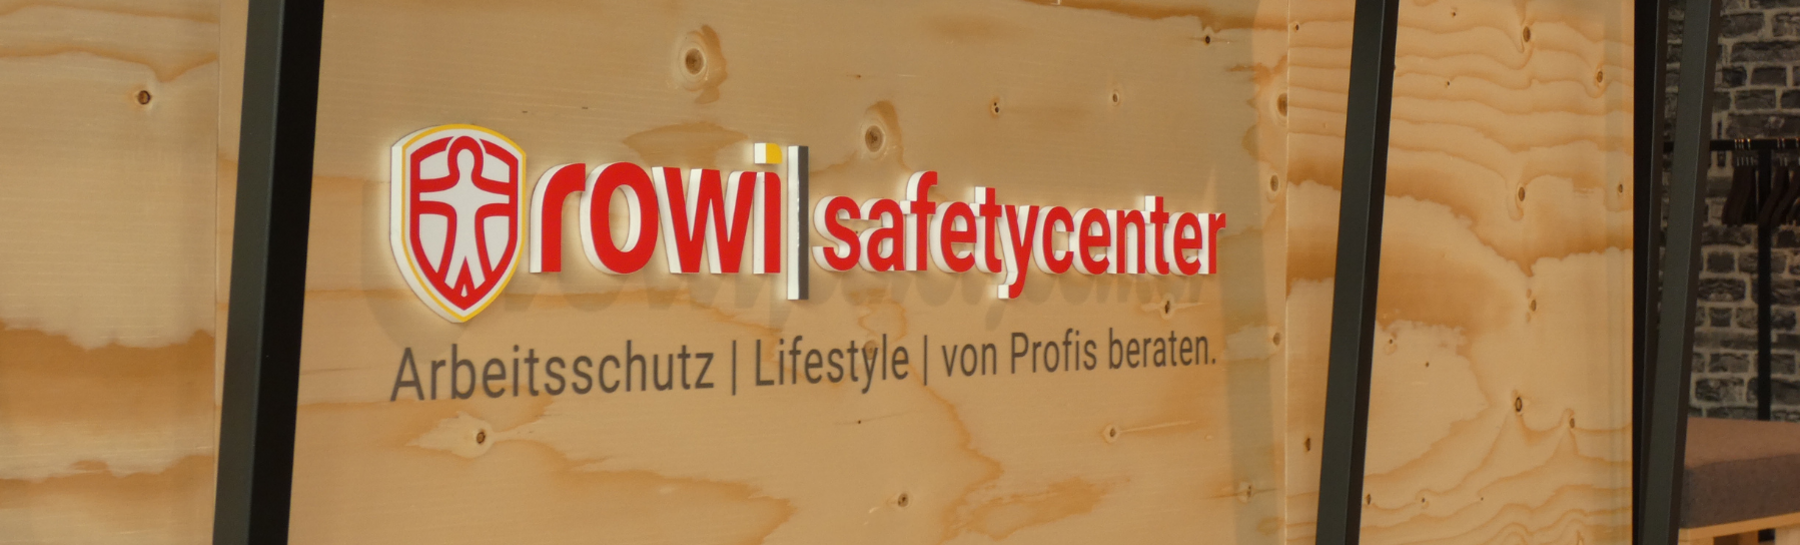 rowisafetycenter in Wilnsdorf